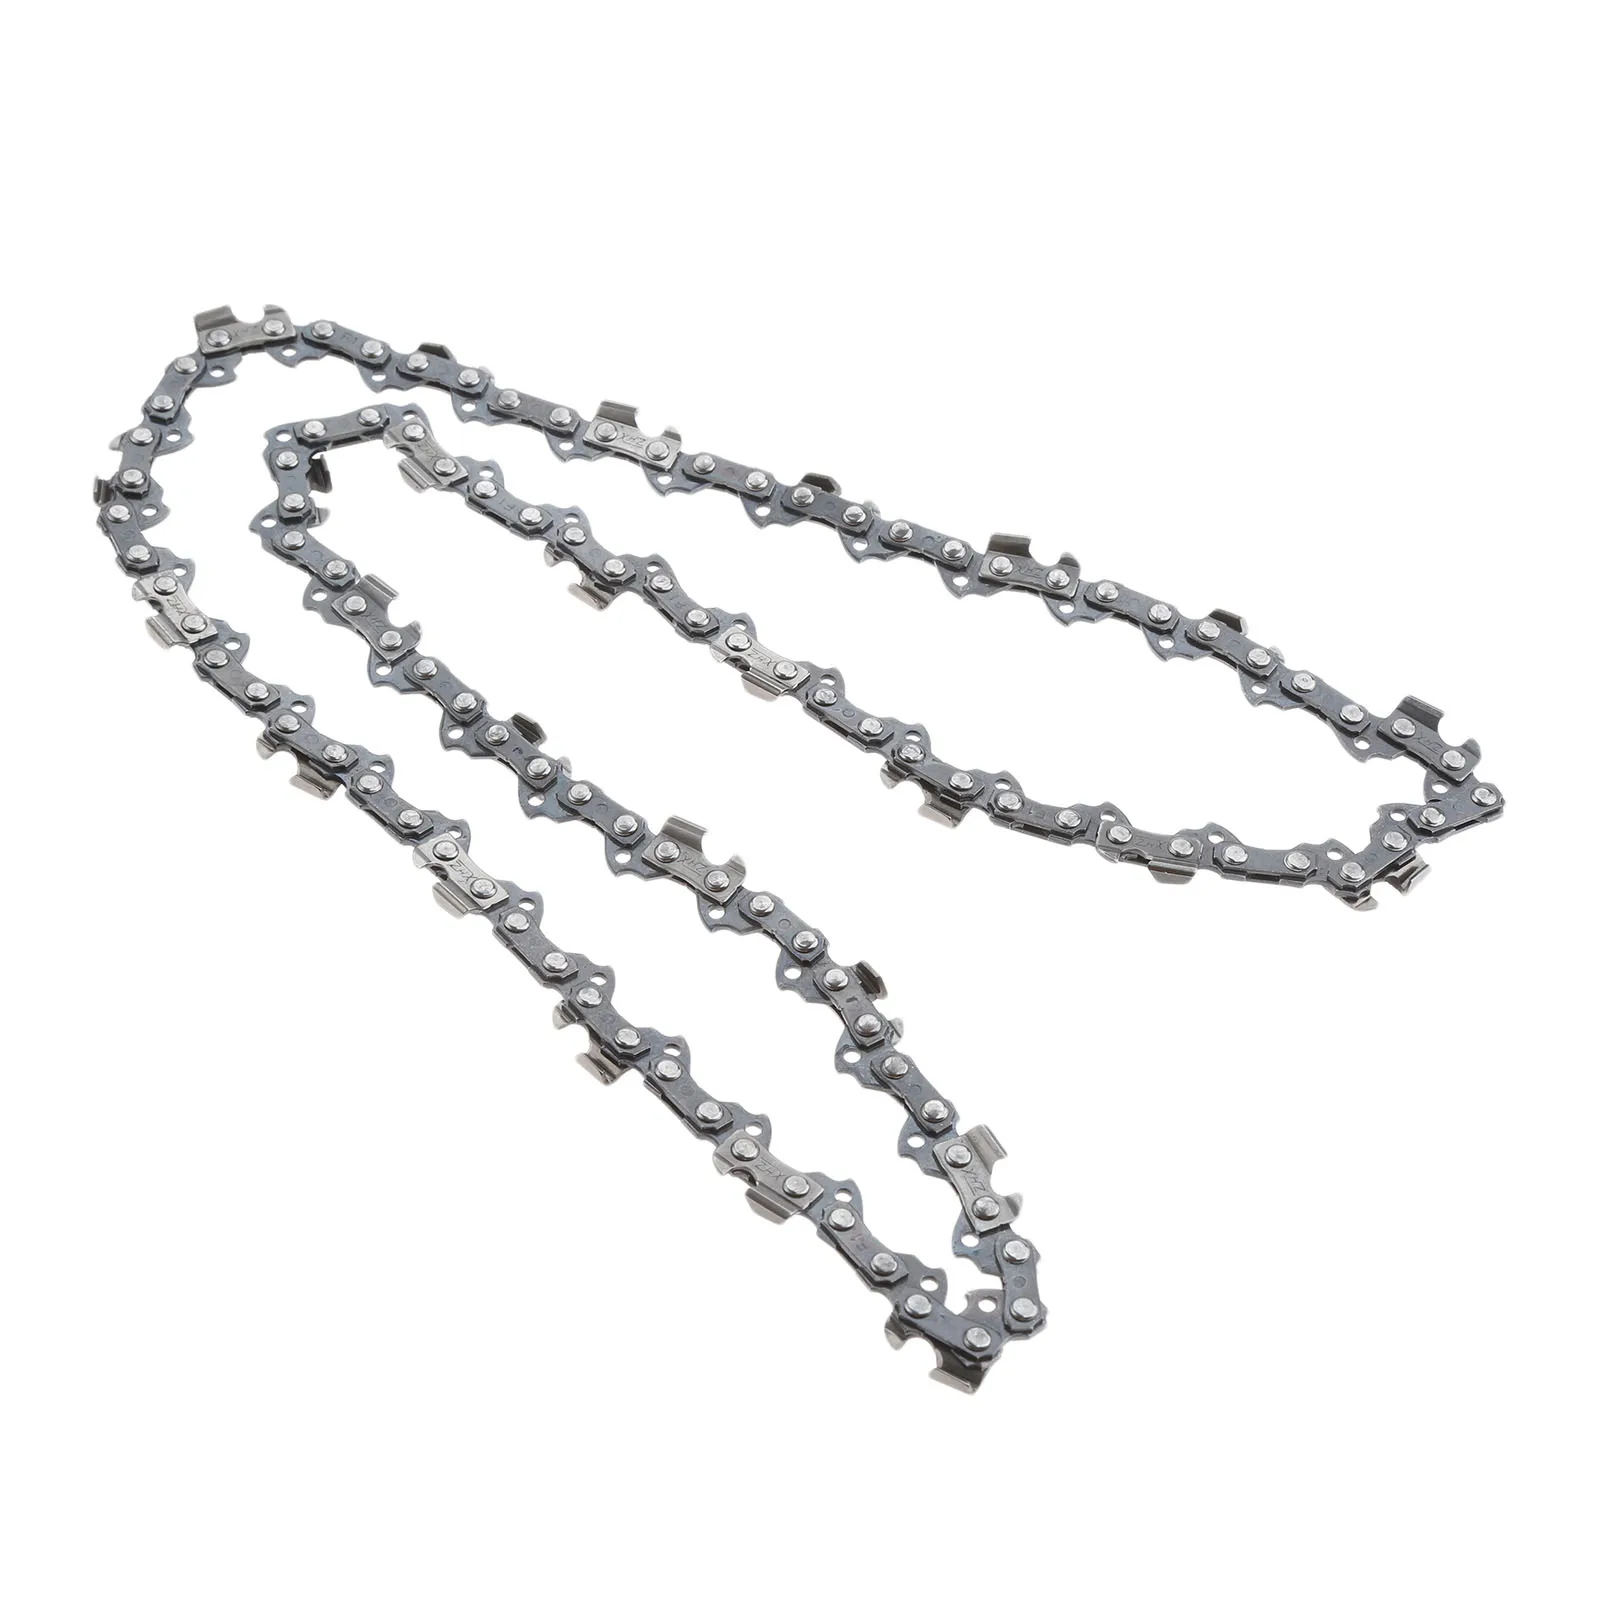 

1x Chainsaw Chains 3/8" .050 Guage 14" inch 52 Drive Link for 2500 Saw Chains Woodworking Tools